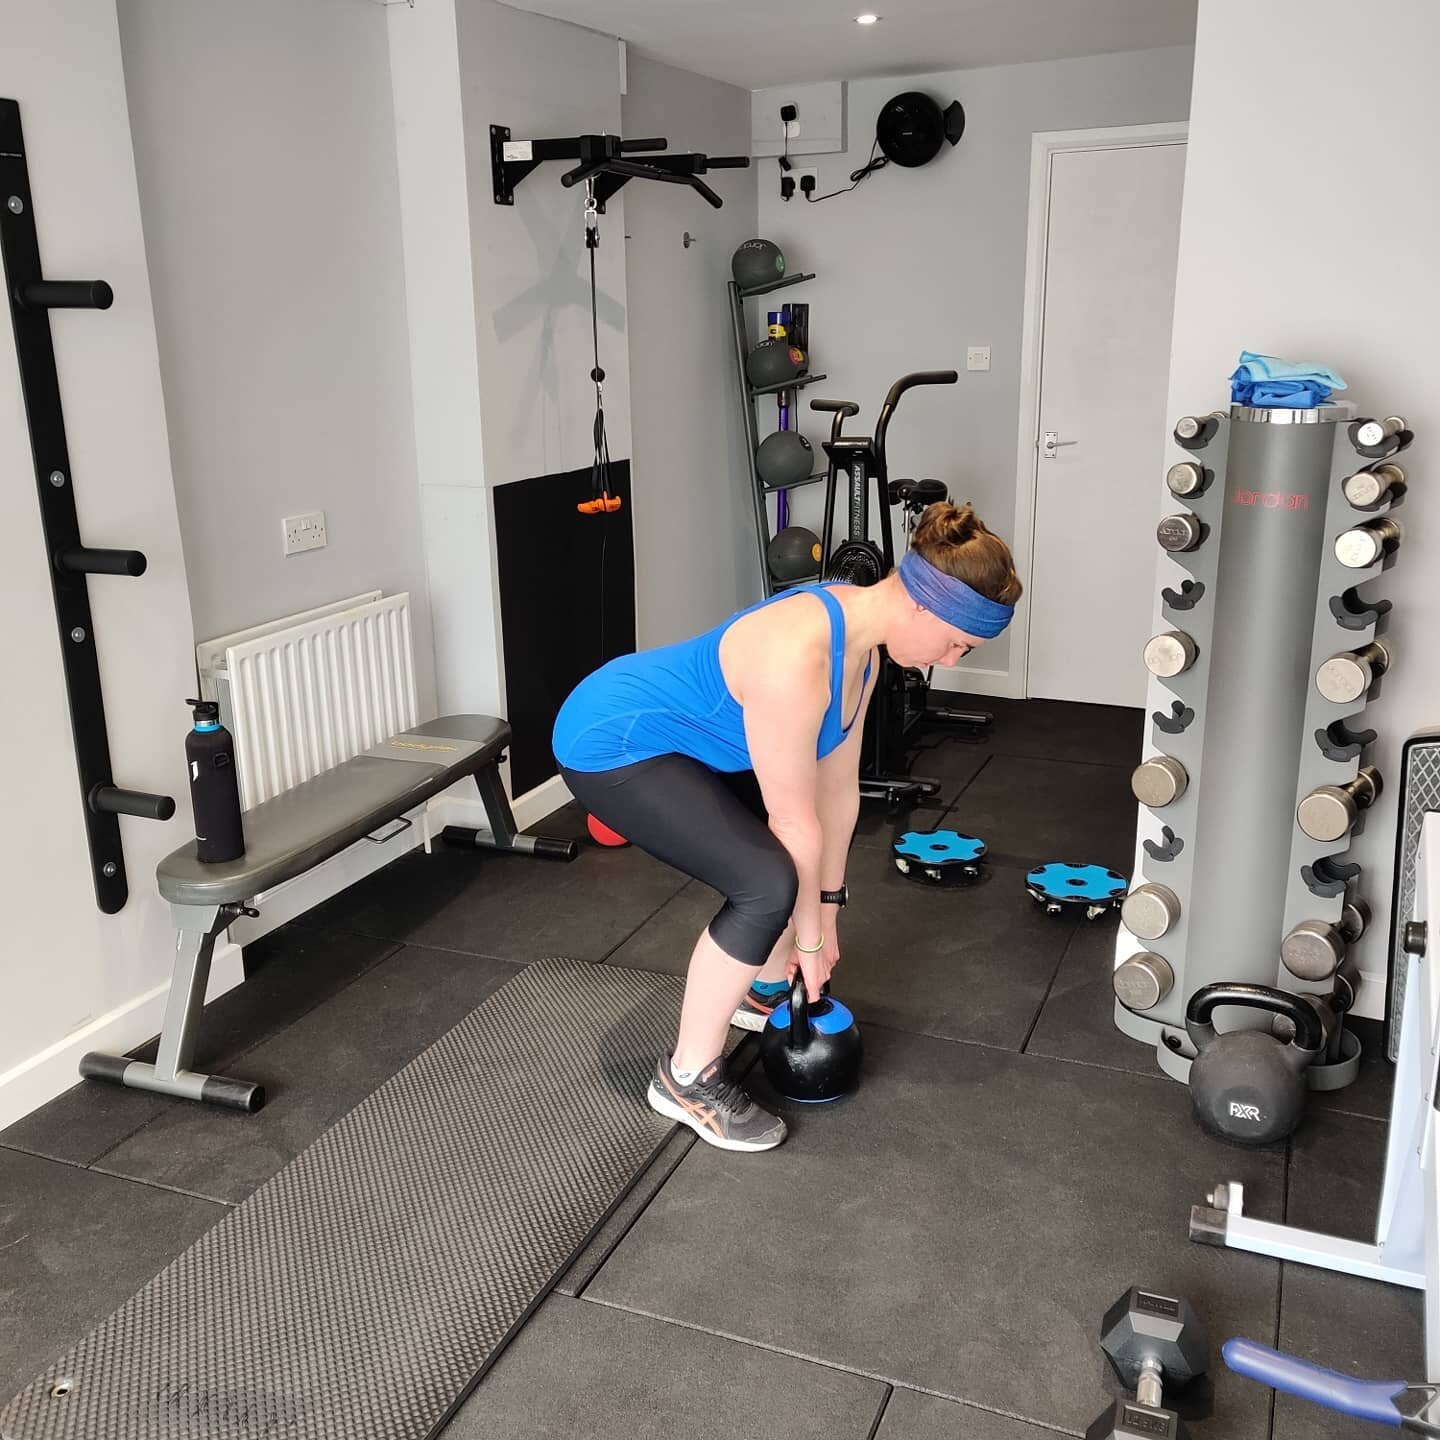 Saturday studio workout is back! Been a couple of weeks as we've been busy but good to be back and use the new cable as well!

1) KB Deadlifts
2) Cable High Row
3) Hamstring Curls
4) Press Ups
5) DB Squats
6) Cable Mid Row

Compound moves followed by